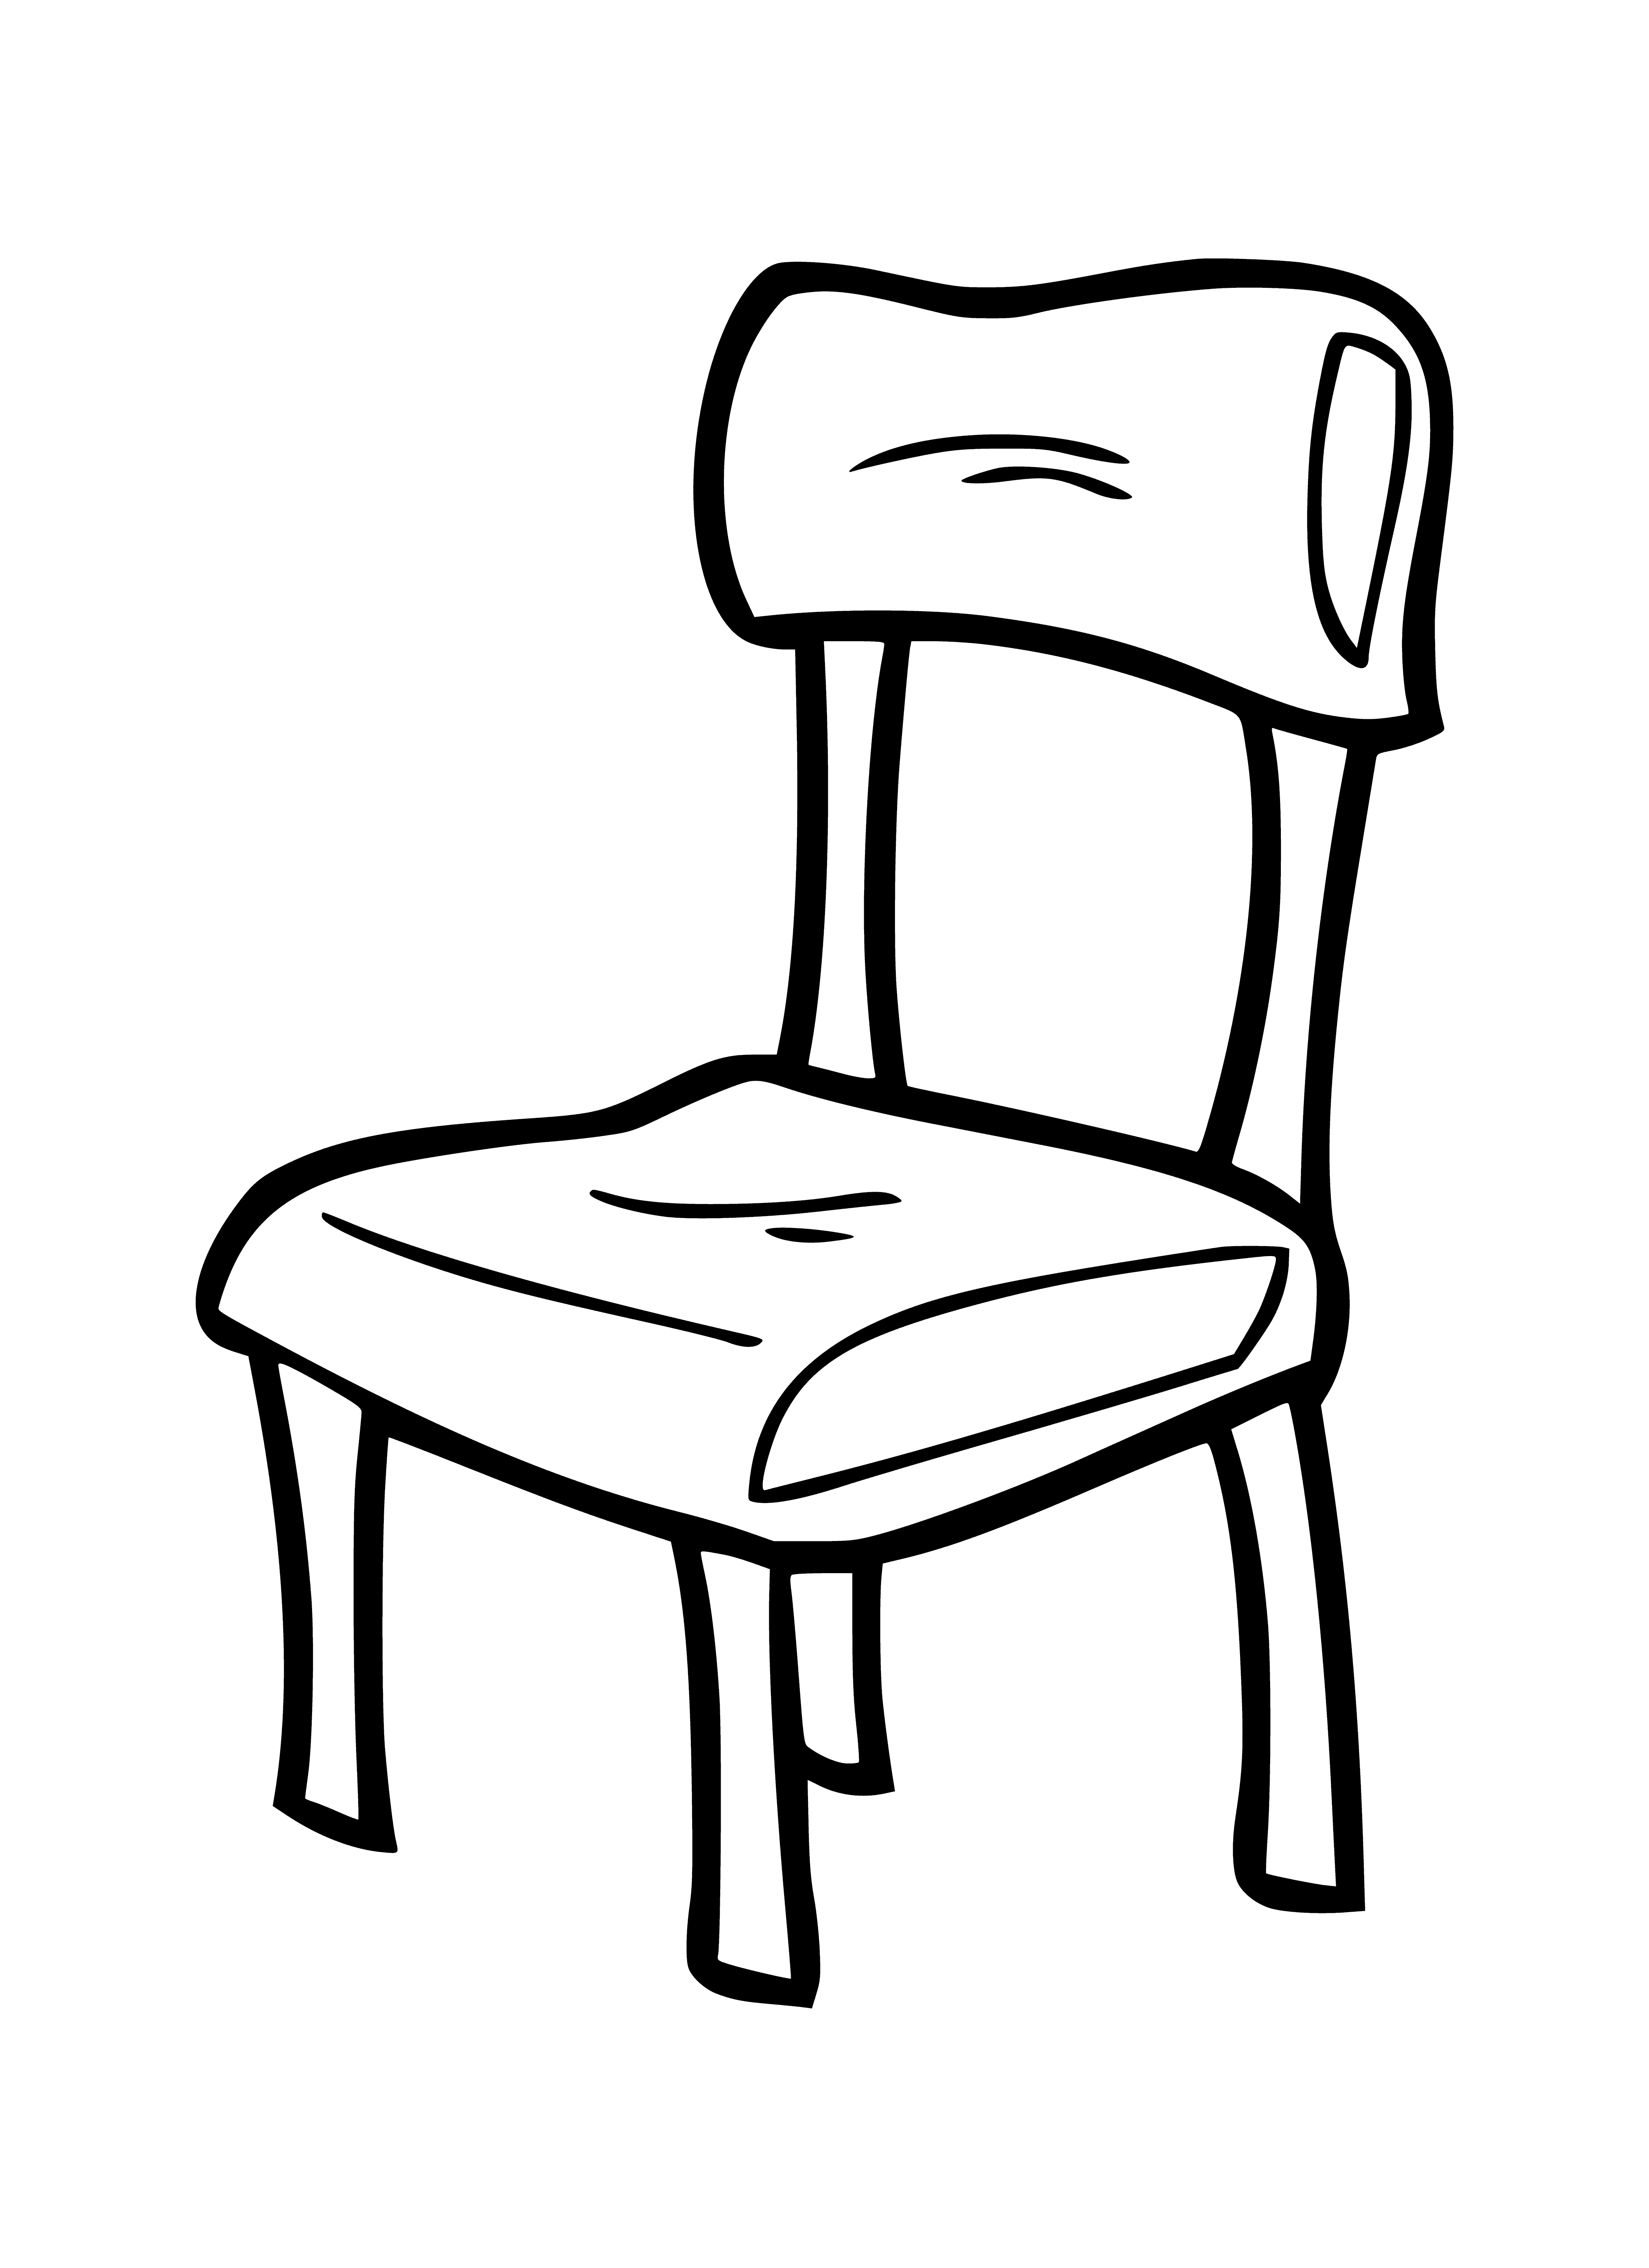 coloring page: Wooden chair w/ high back, green fabric upholstery, four legs w/ caster wheels.